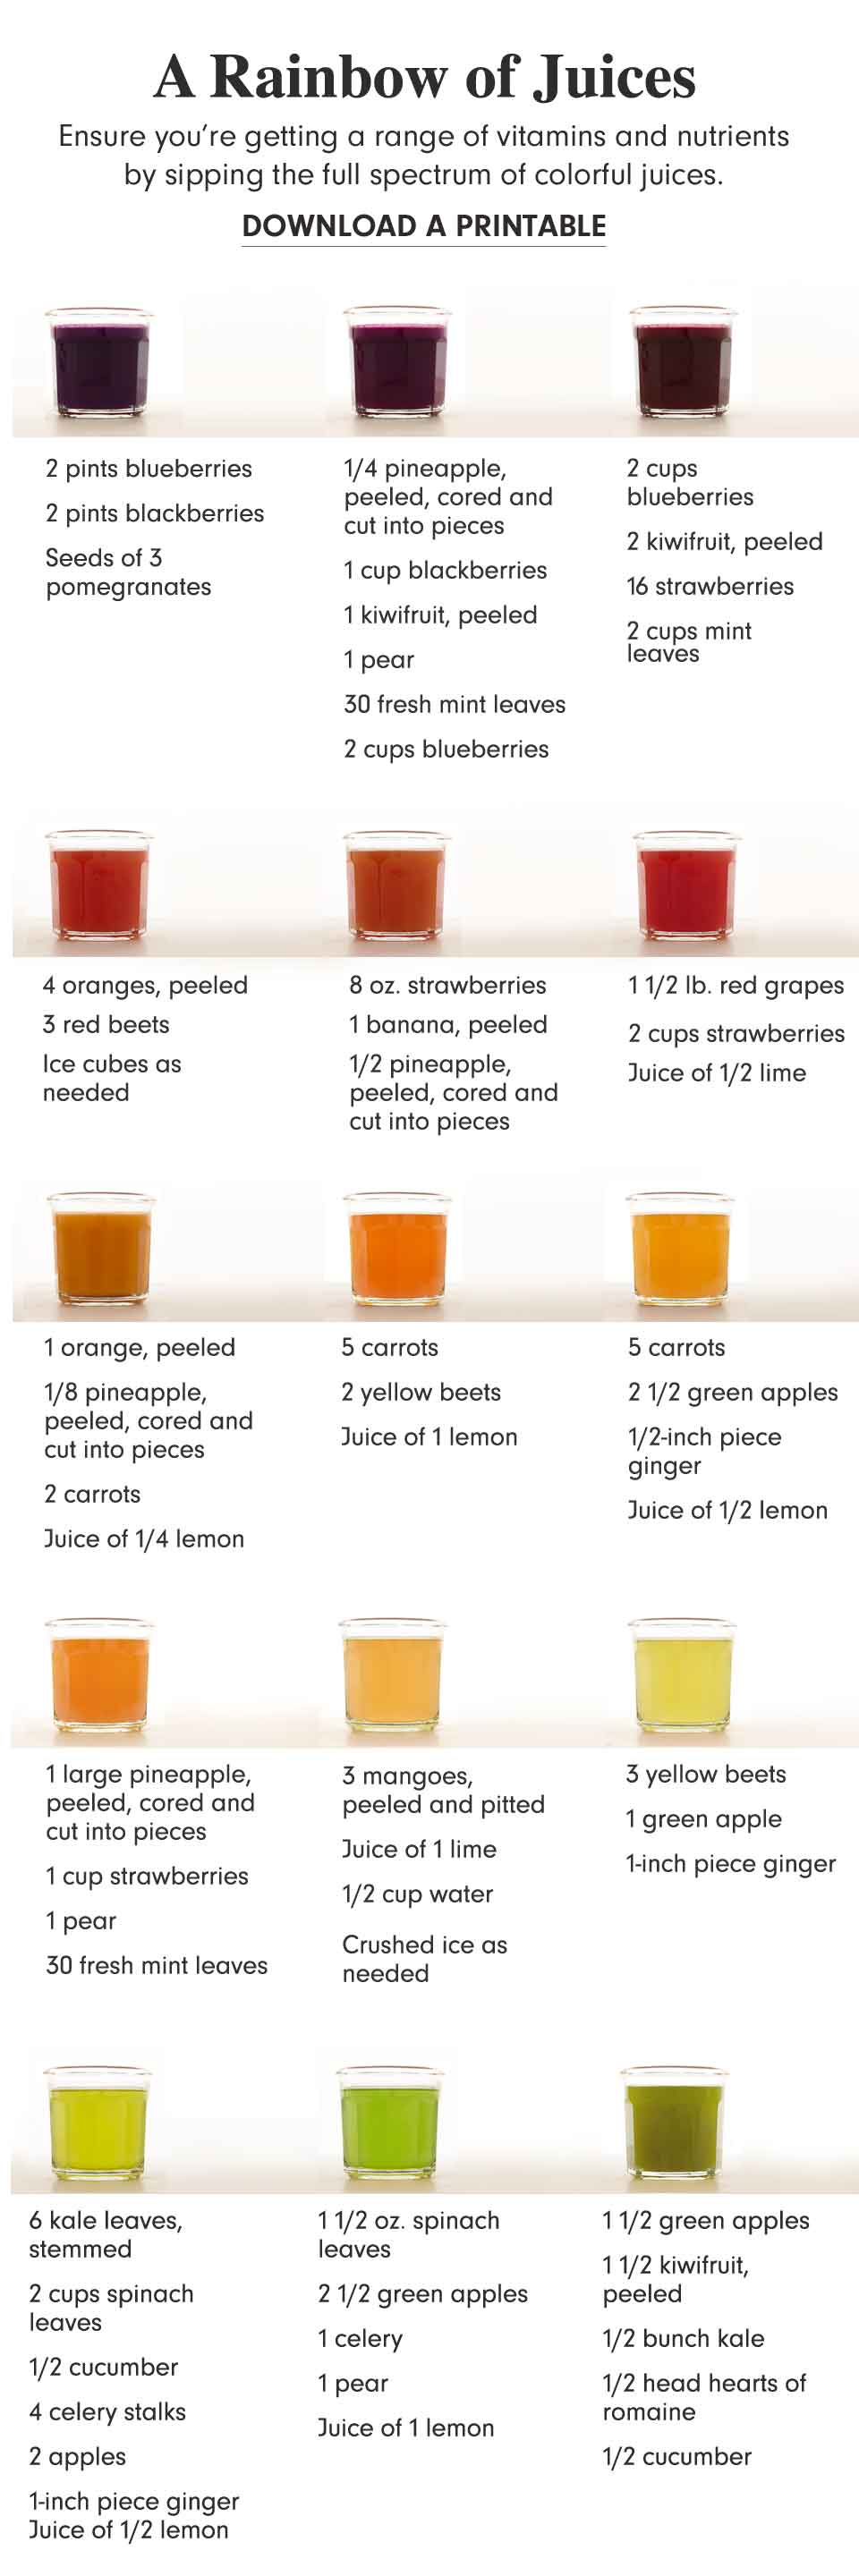 A Rainbow of Juices - DOWNLOAD A PRINTABLE